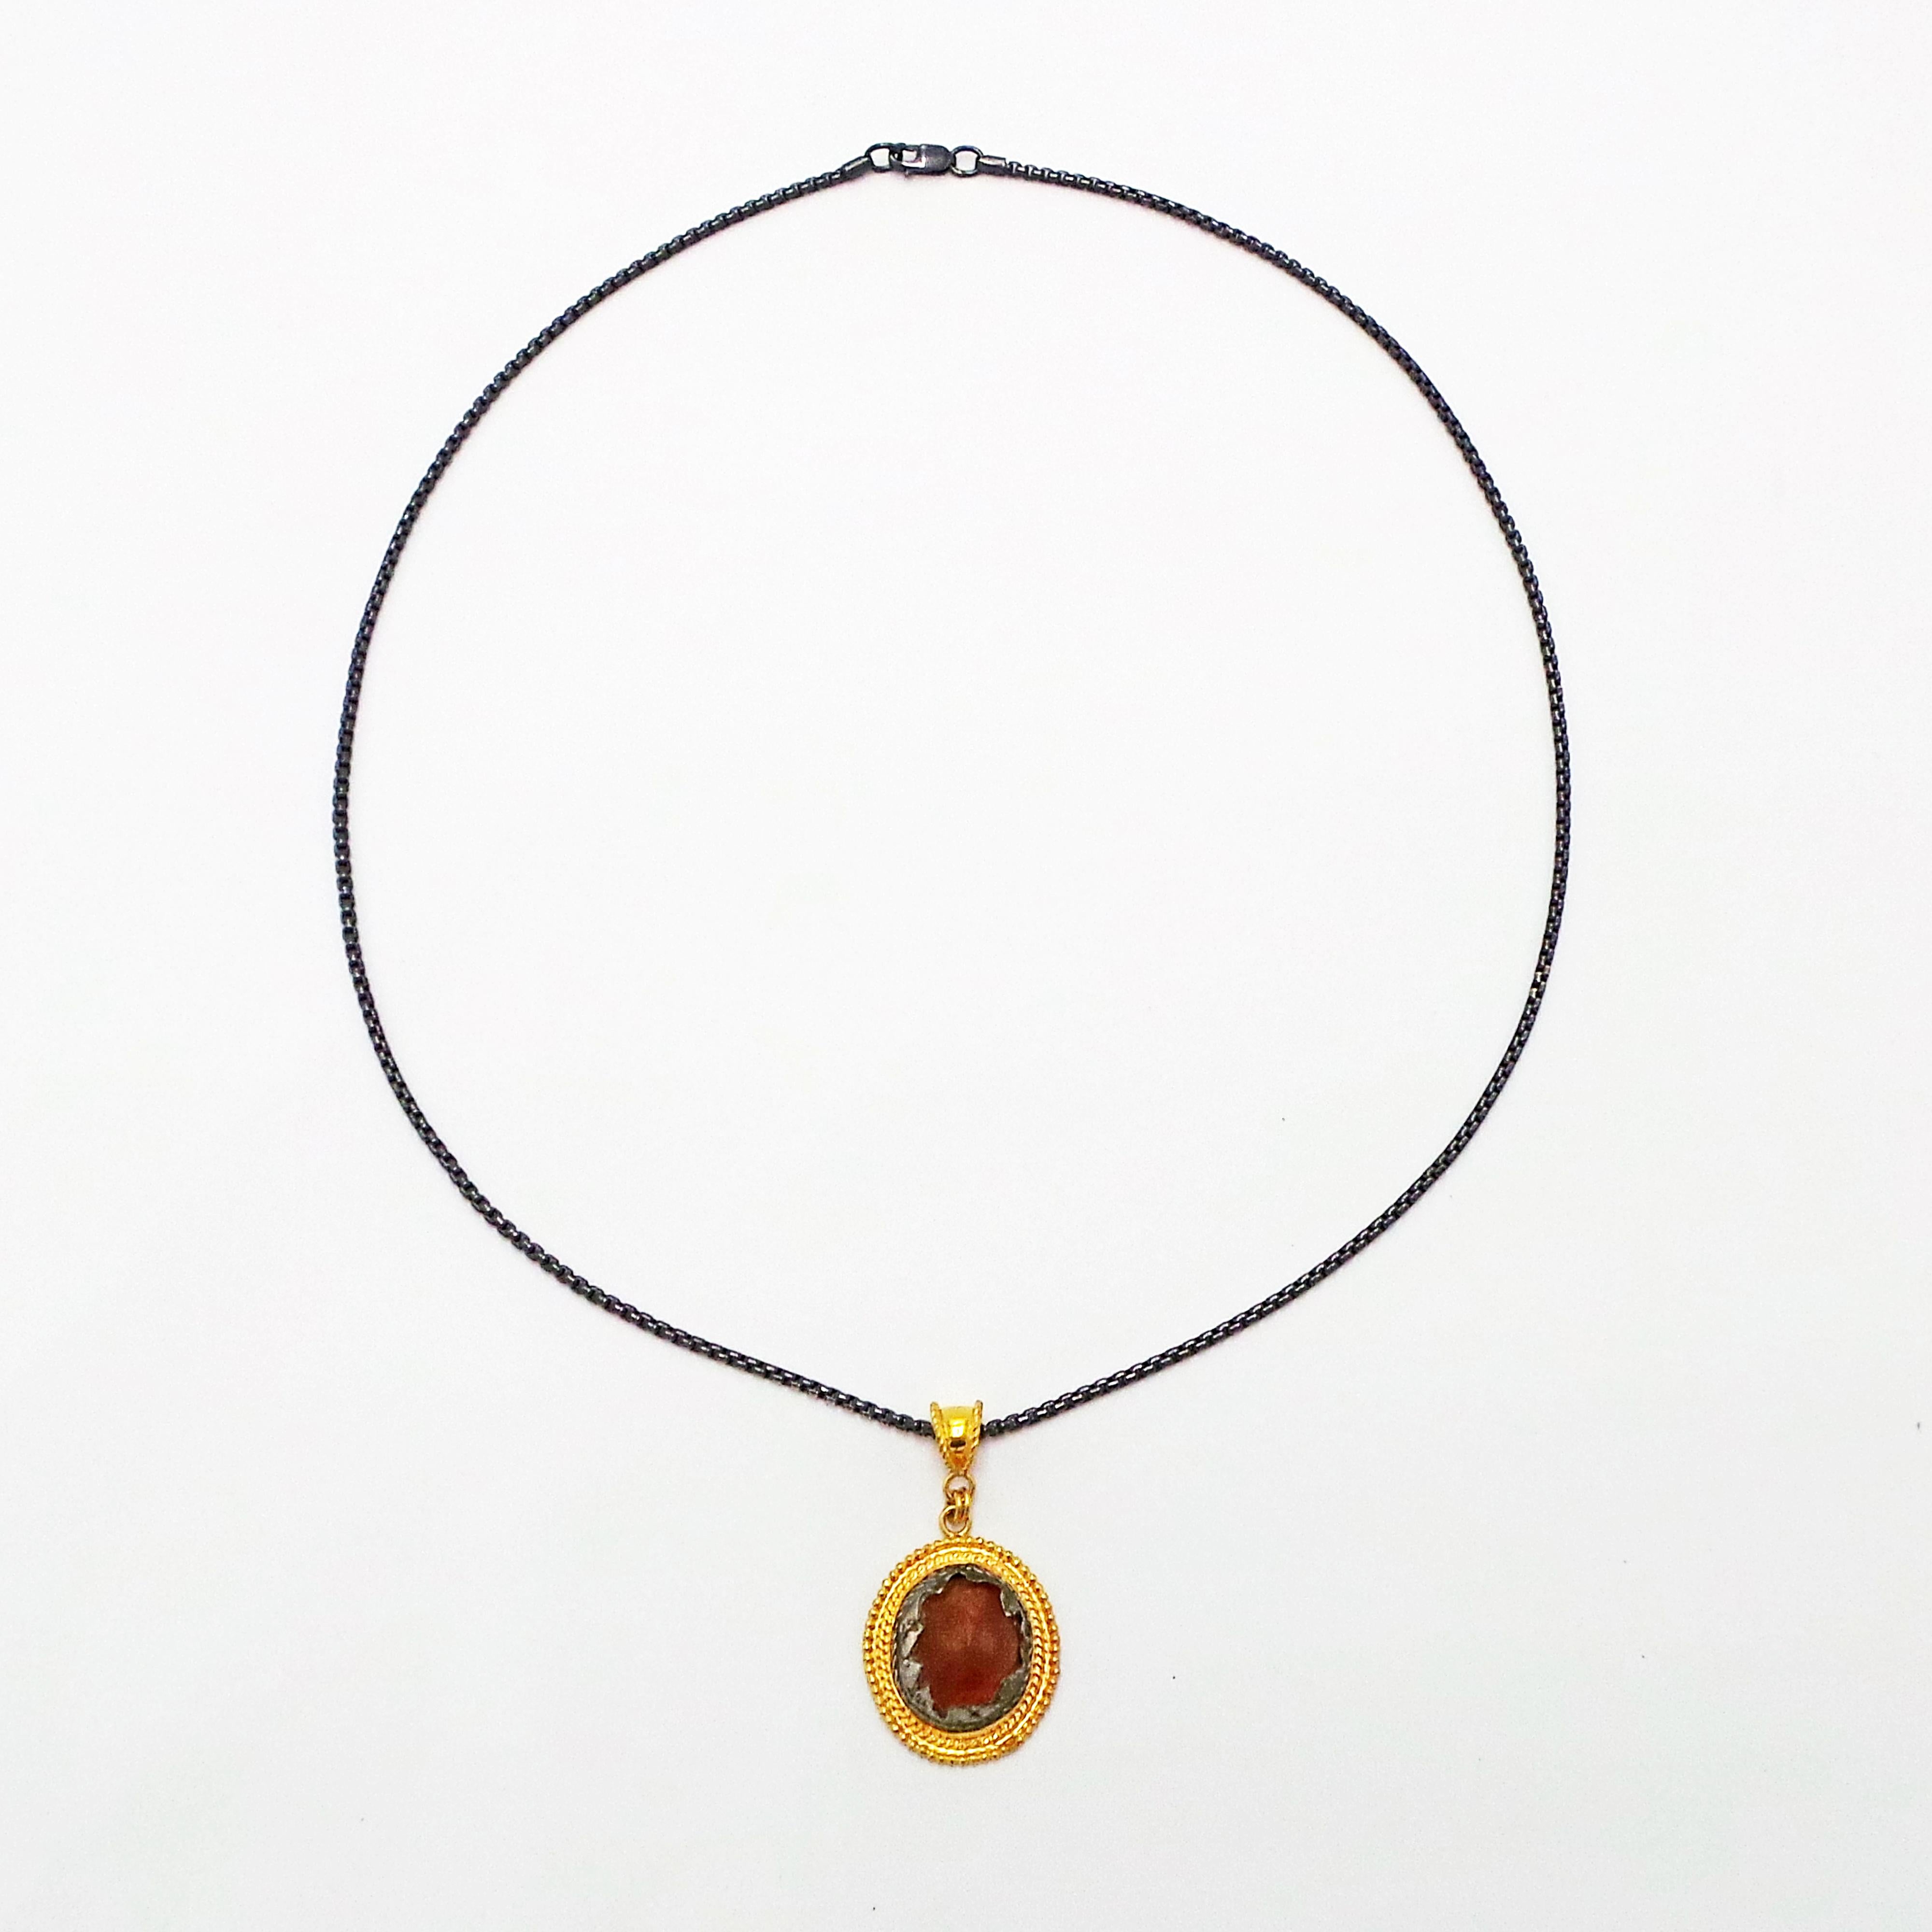 Authentic ancient Roman carved Carnelian gemstone encased in original ancient silver mounting (1st-3rd century AD), and set in custom 22k yellow gold rope design pendant. Pendant is on an 18 inch oxidized sterling silver box chain. Very rare and